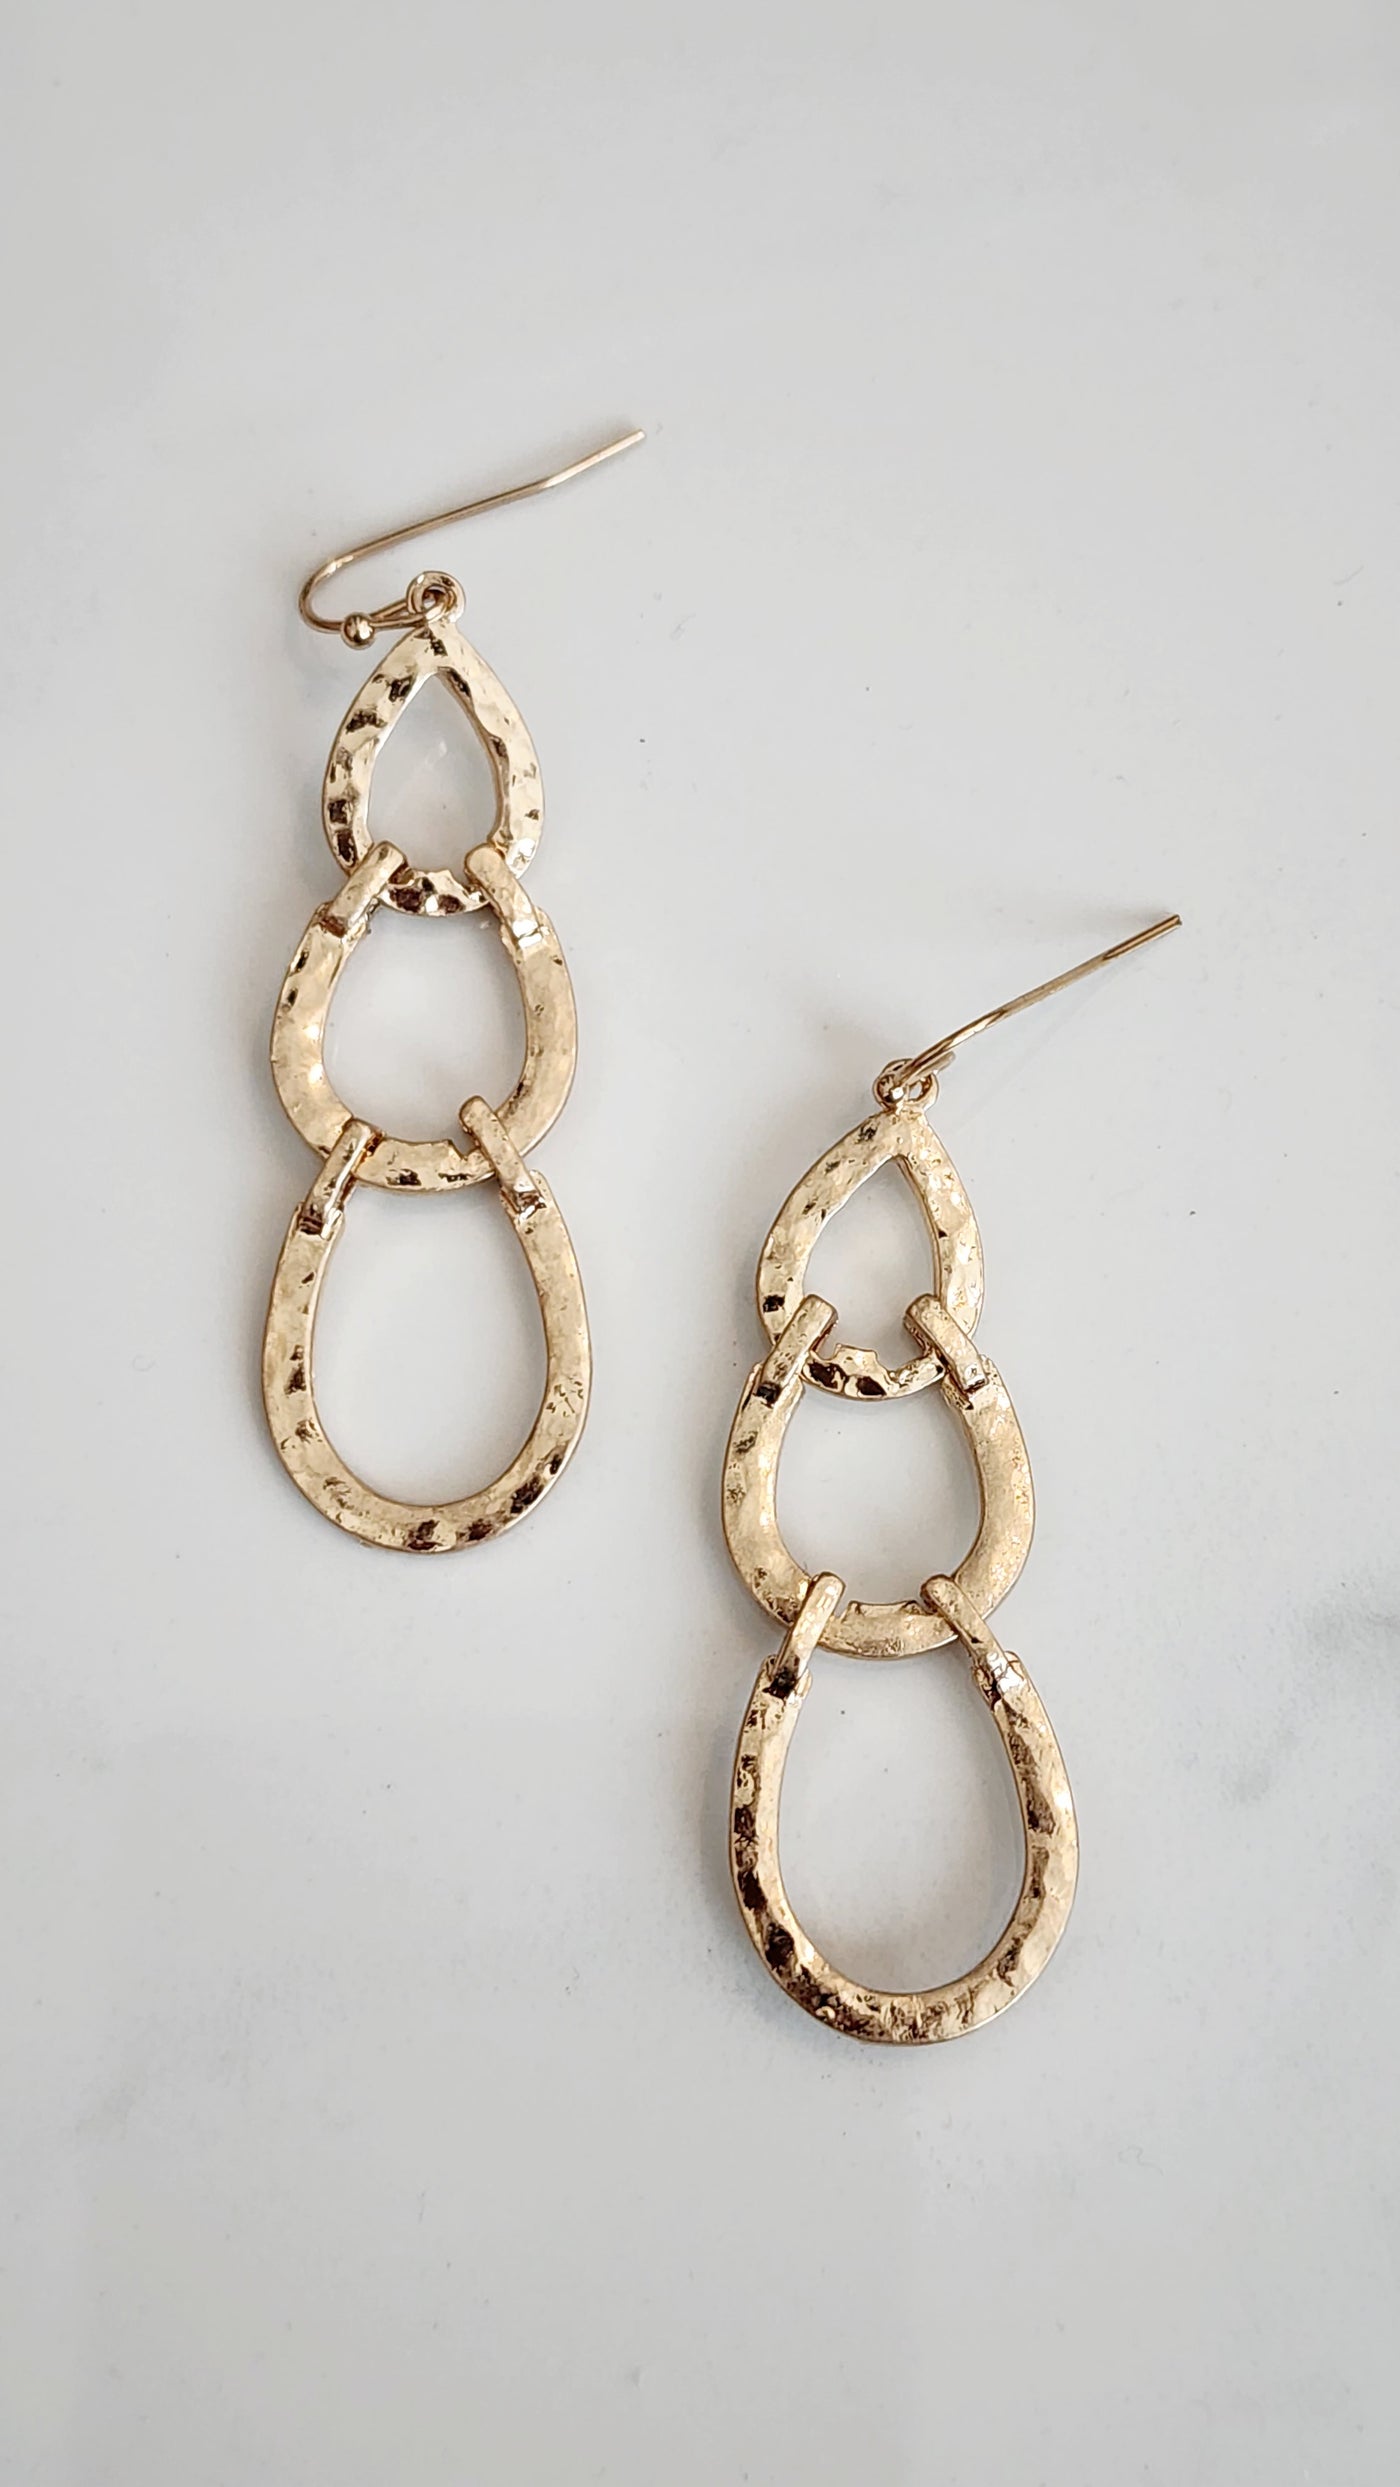 CONNIE earrings in gold